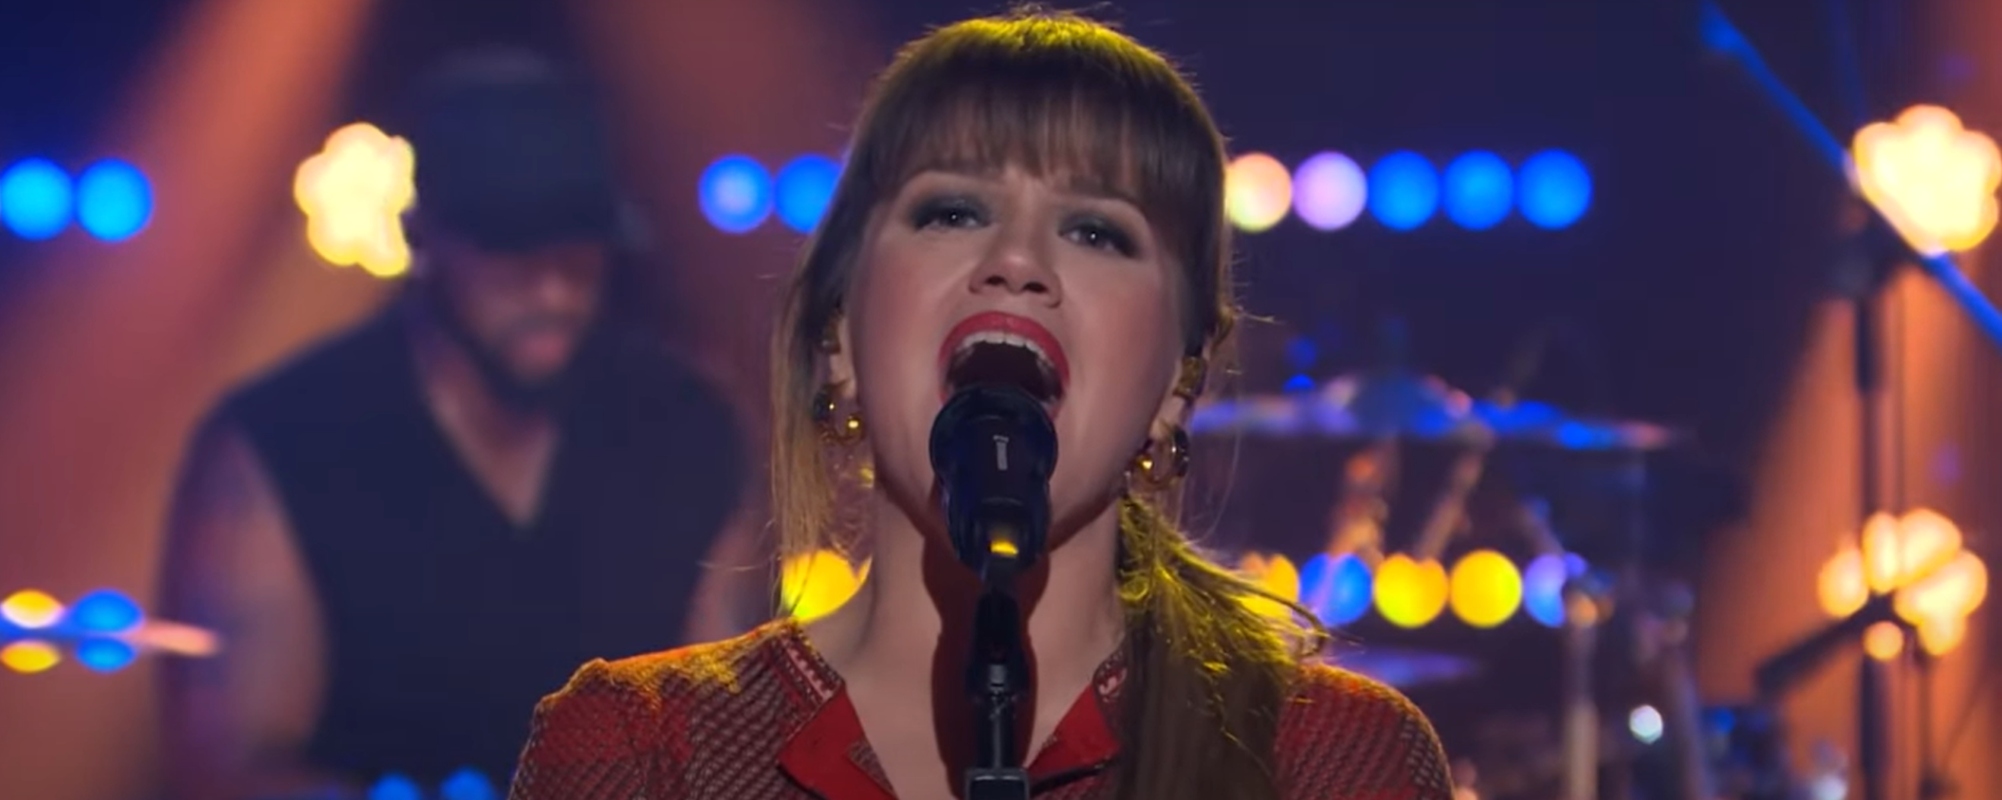 After 14 Years, Kelly Clarkson Sings This Fan-Favorite Song—and Fans Can’t Hide Their Happy Tears